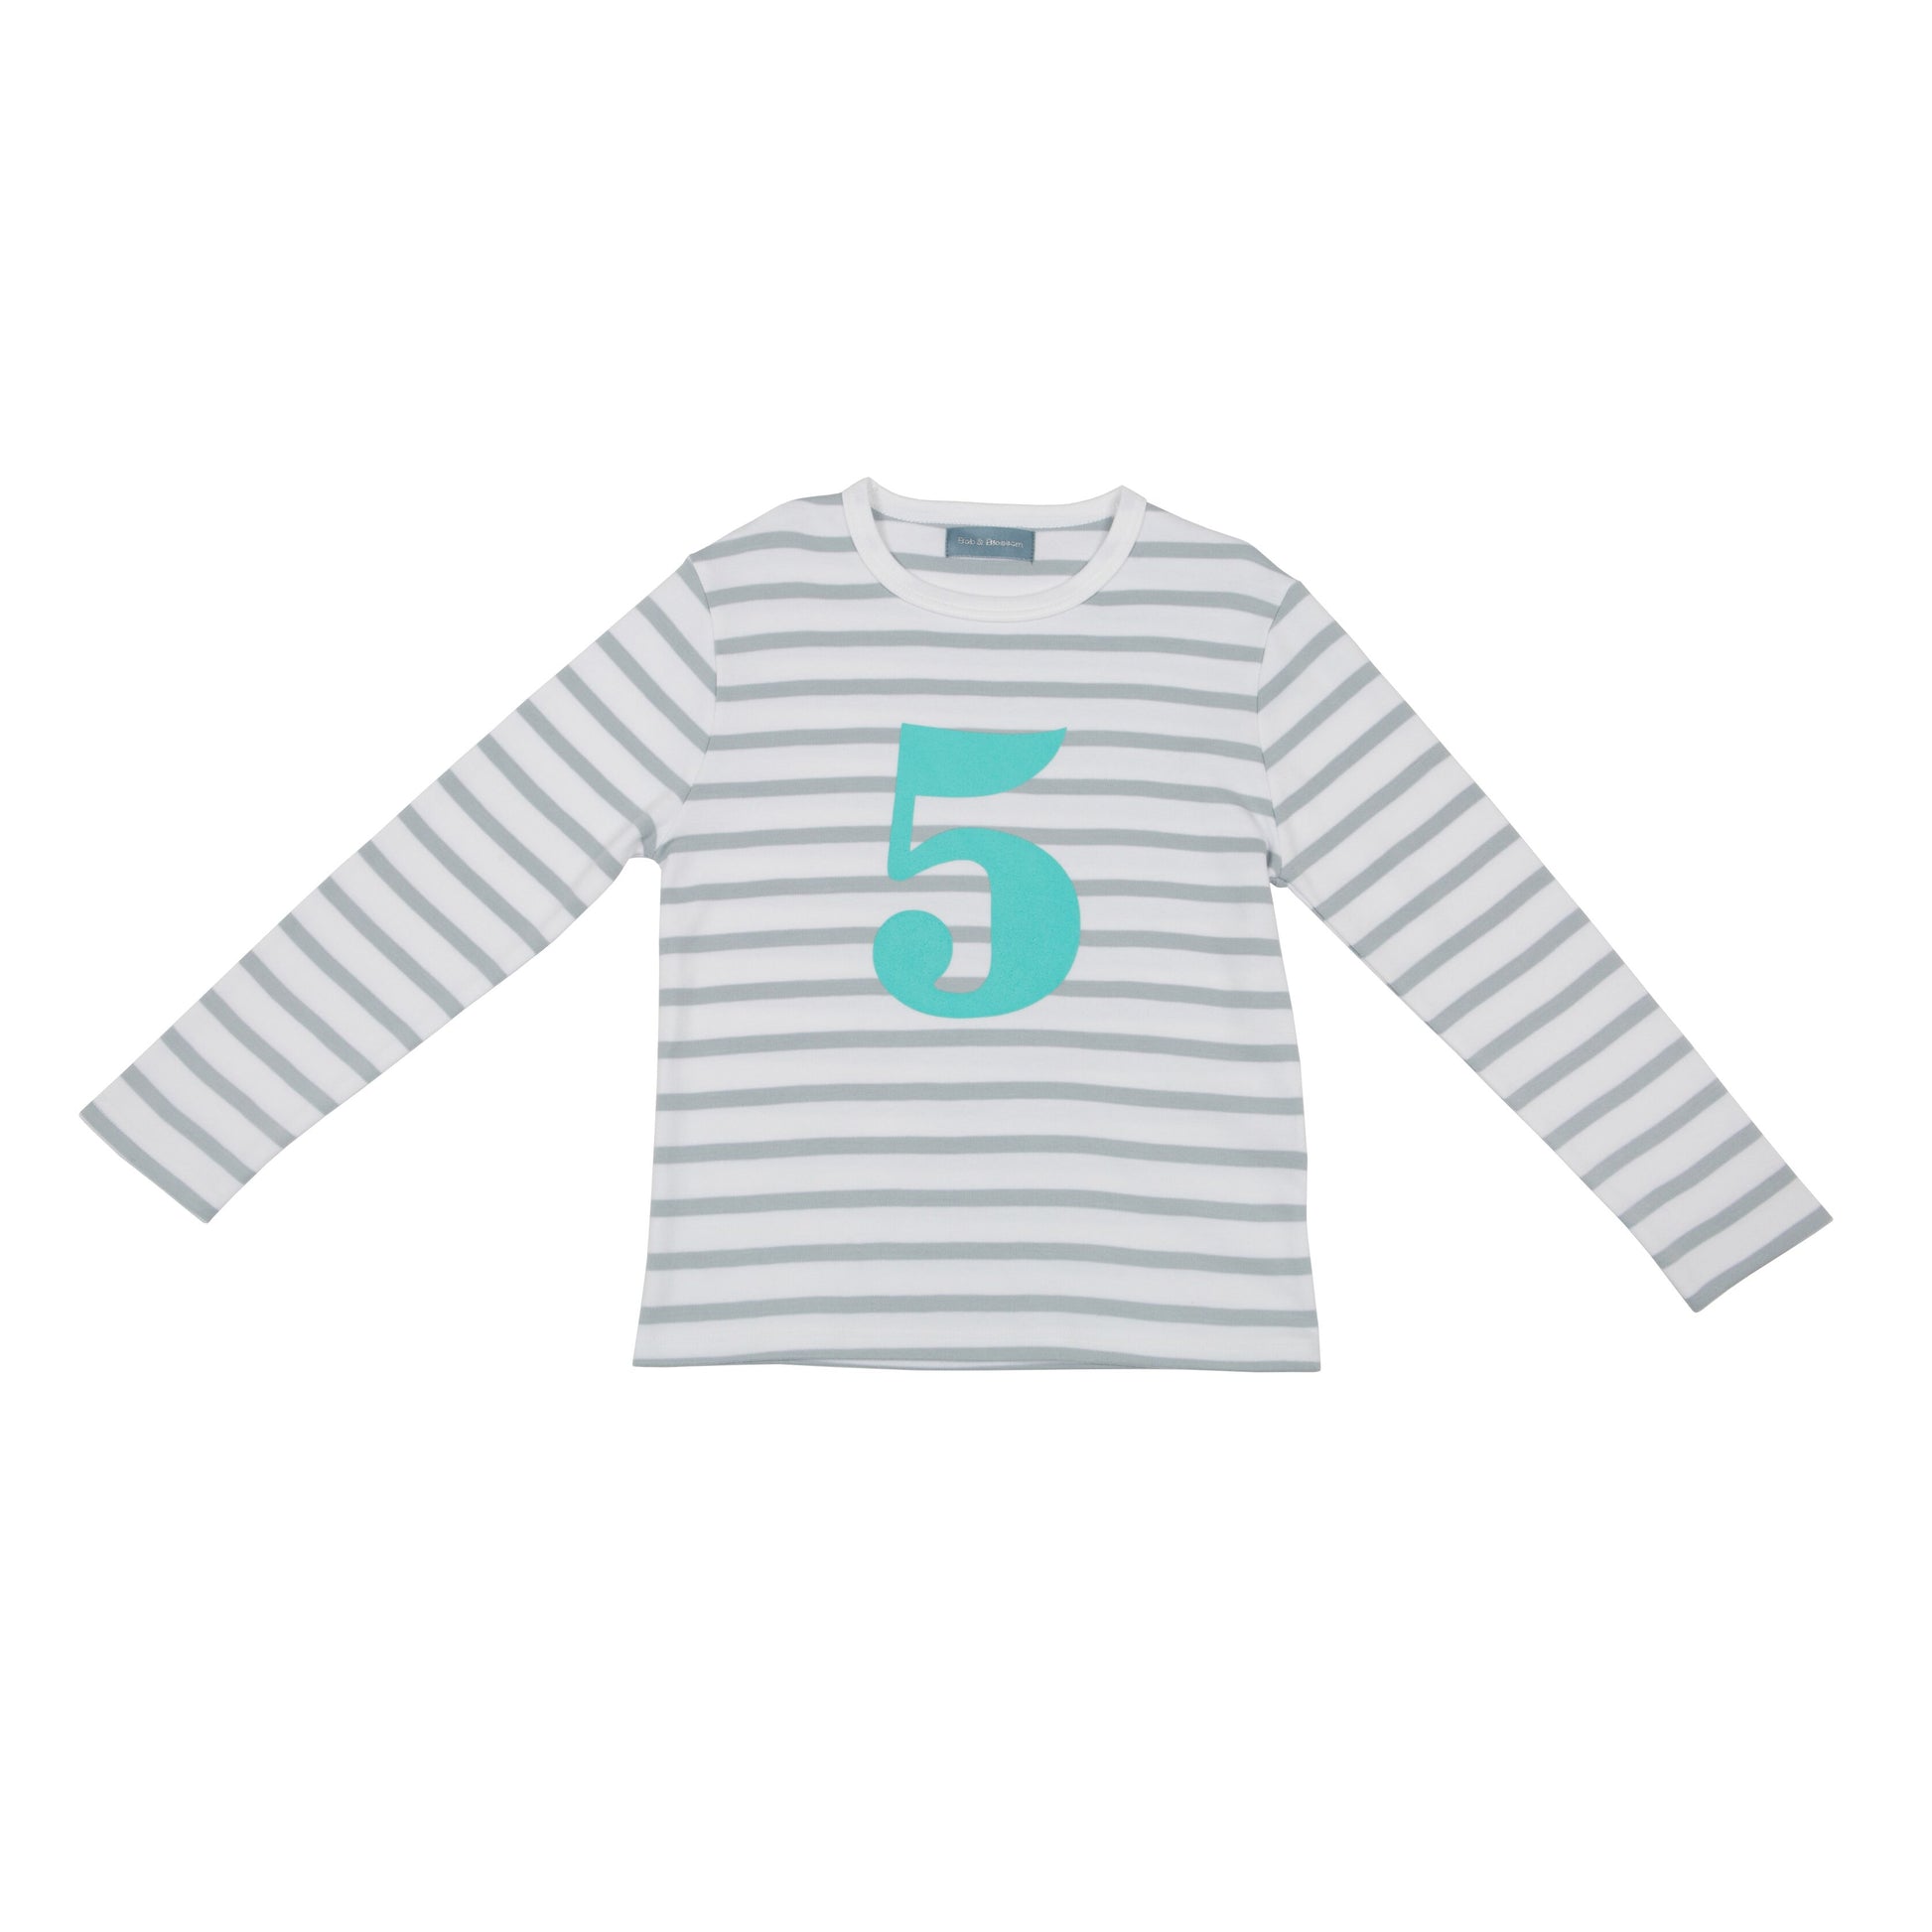 Bob & Blossom grey and white striped long sleeved t shirt with turquoise number 5